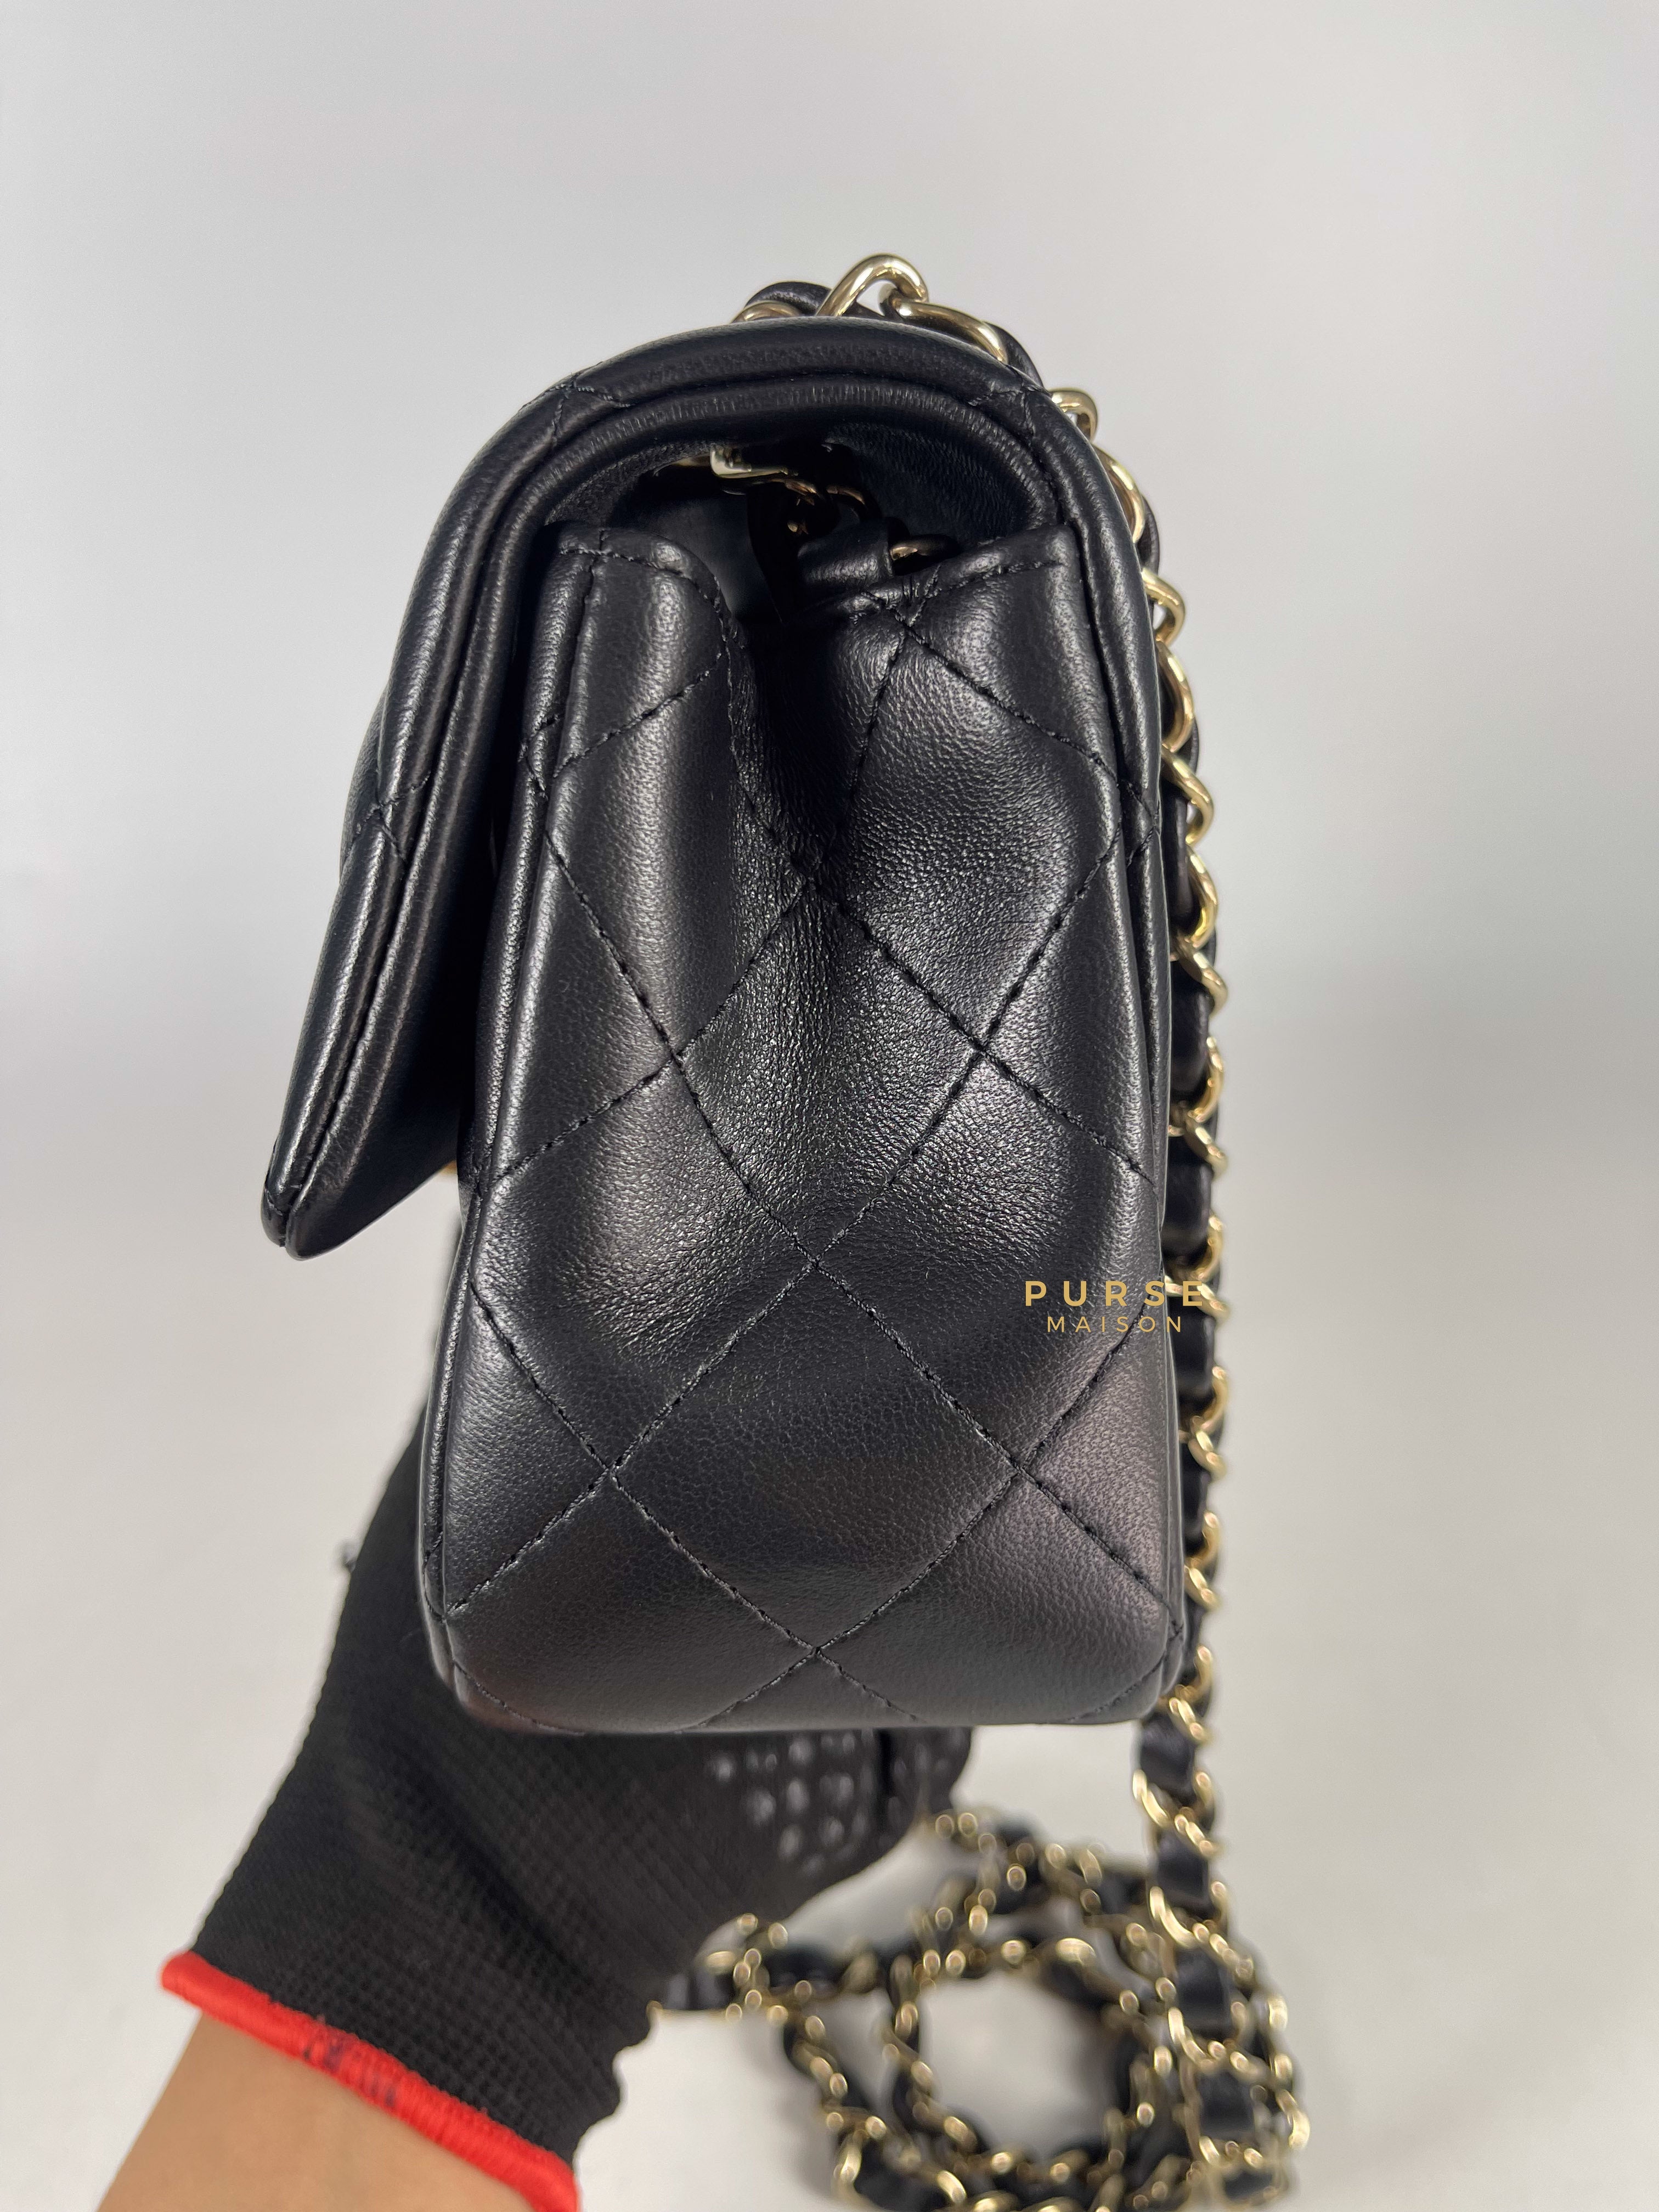 Chanel Black Mini Rectangle in Quilted Black Lambskin and Light Gold Hardware (Microchip) | Purse Maison Luxury Bags Shop